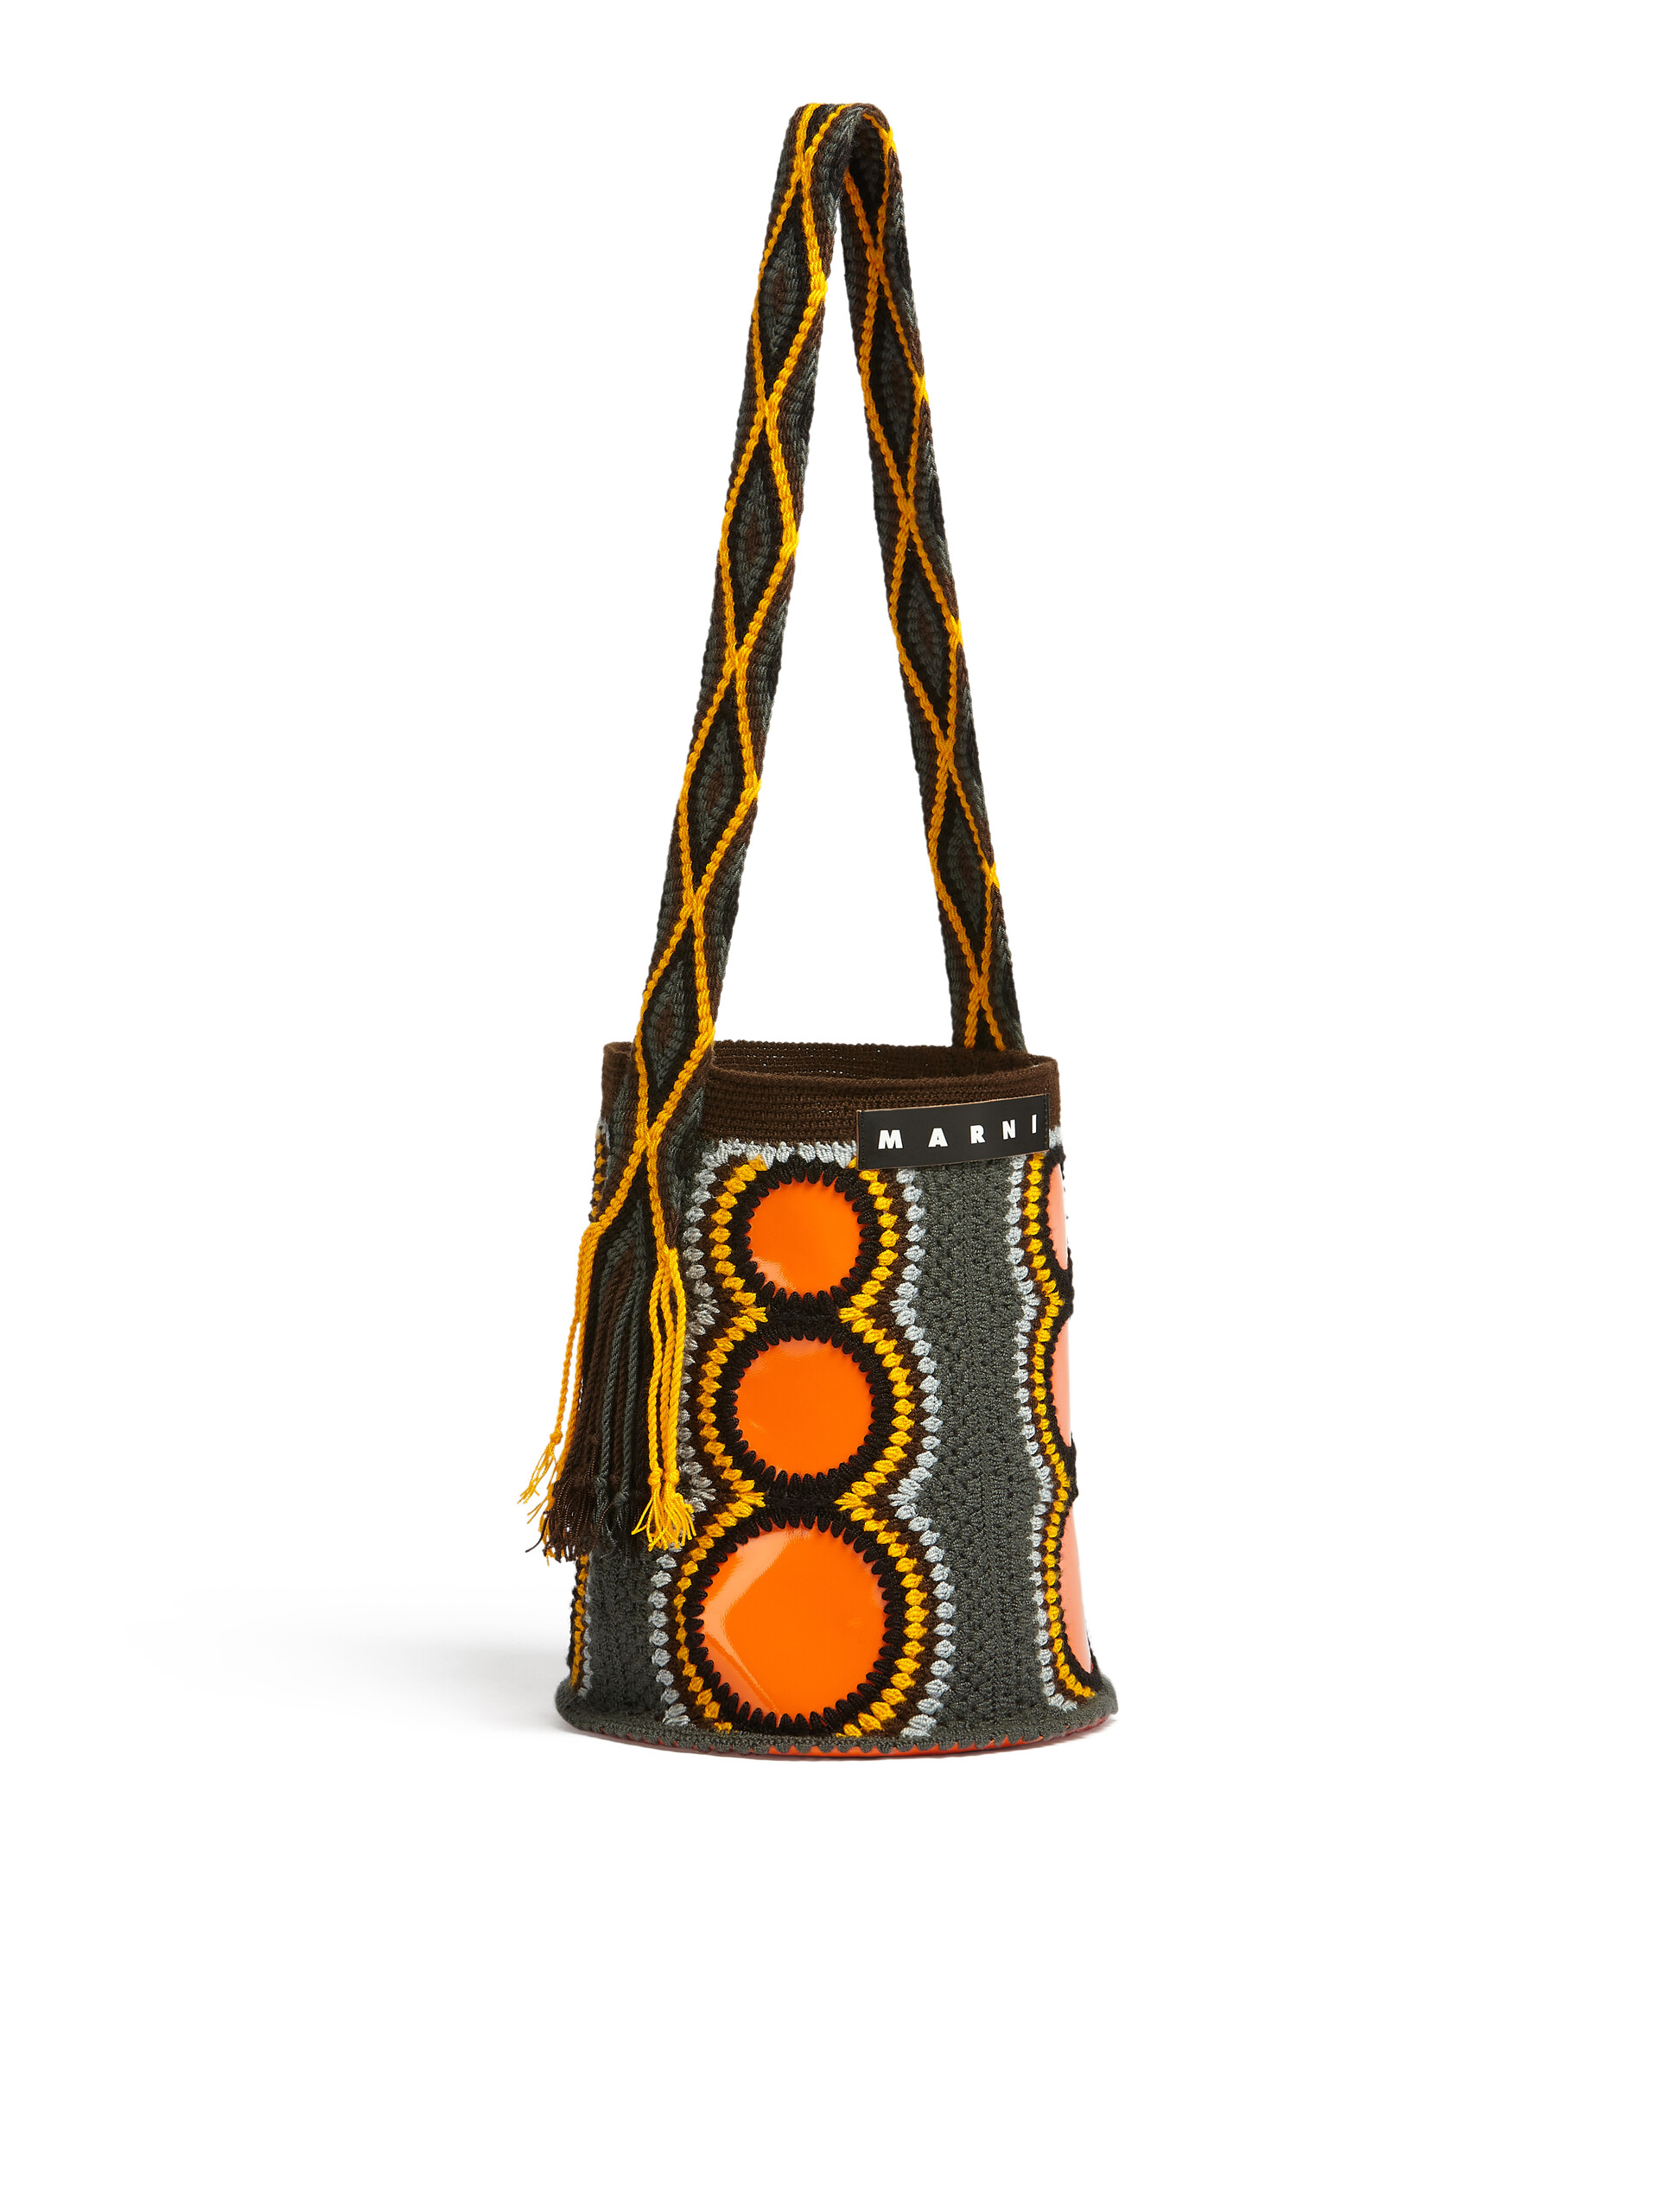 MARNI MARKET bag in green and orange technical wool - Bags - Image 2